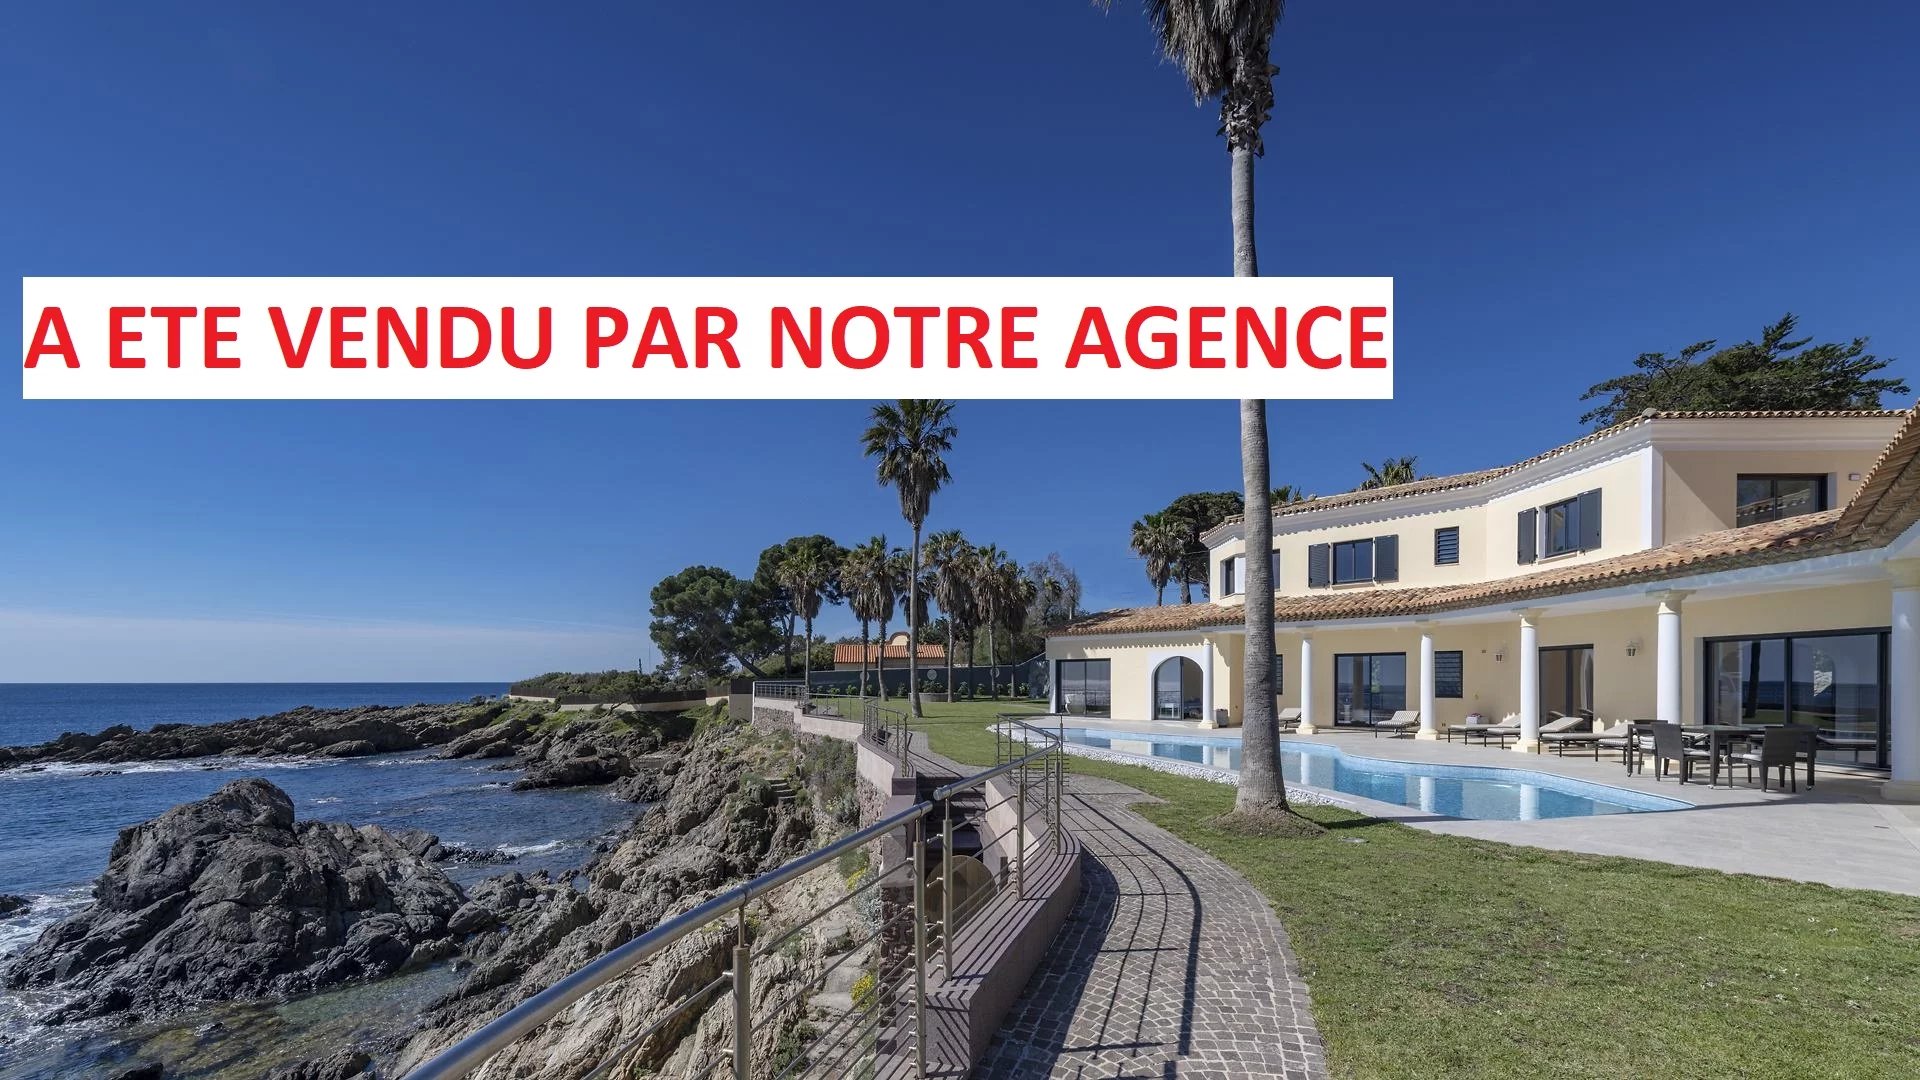 WATERFRONT PROPERTY AT 25 MN FROM  SAINT TROPEZ